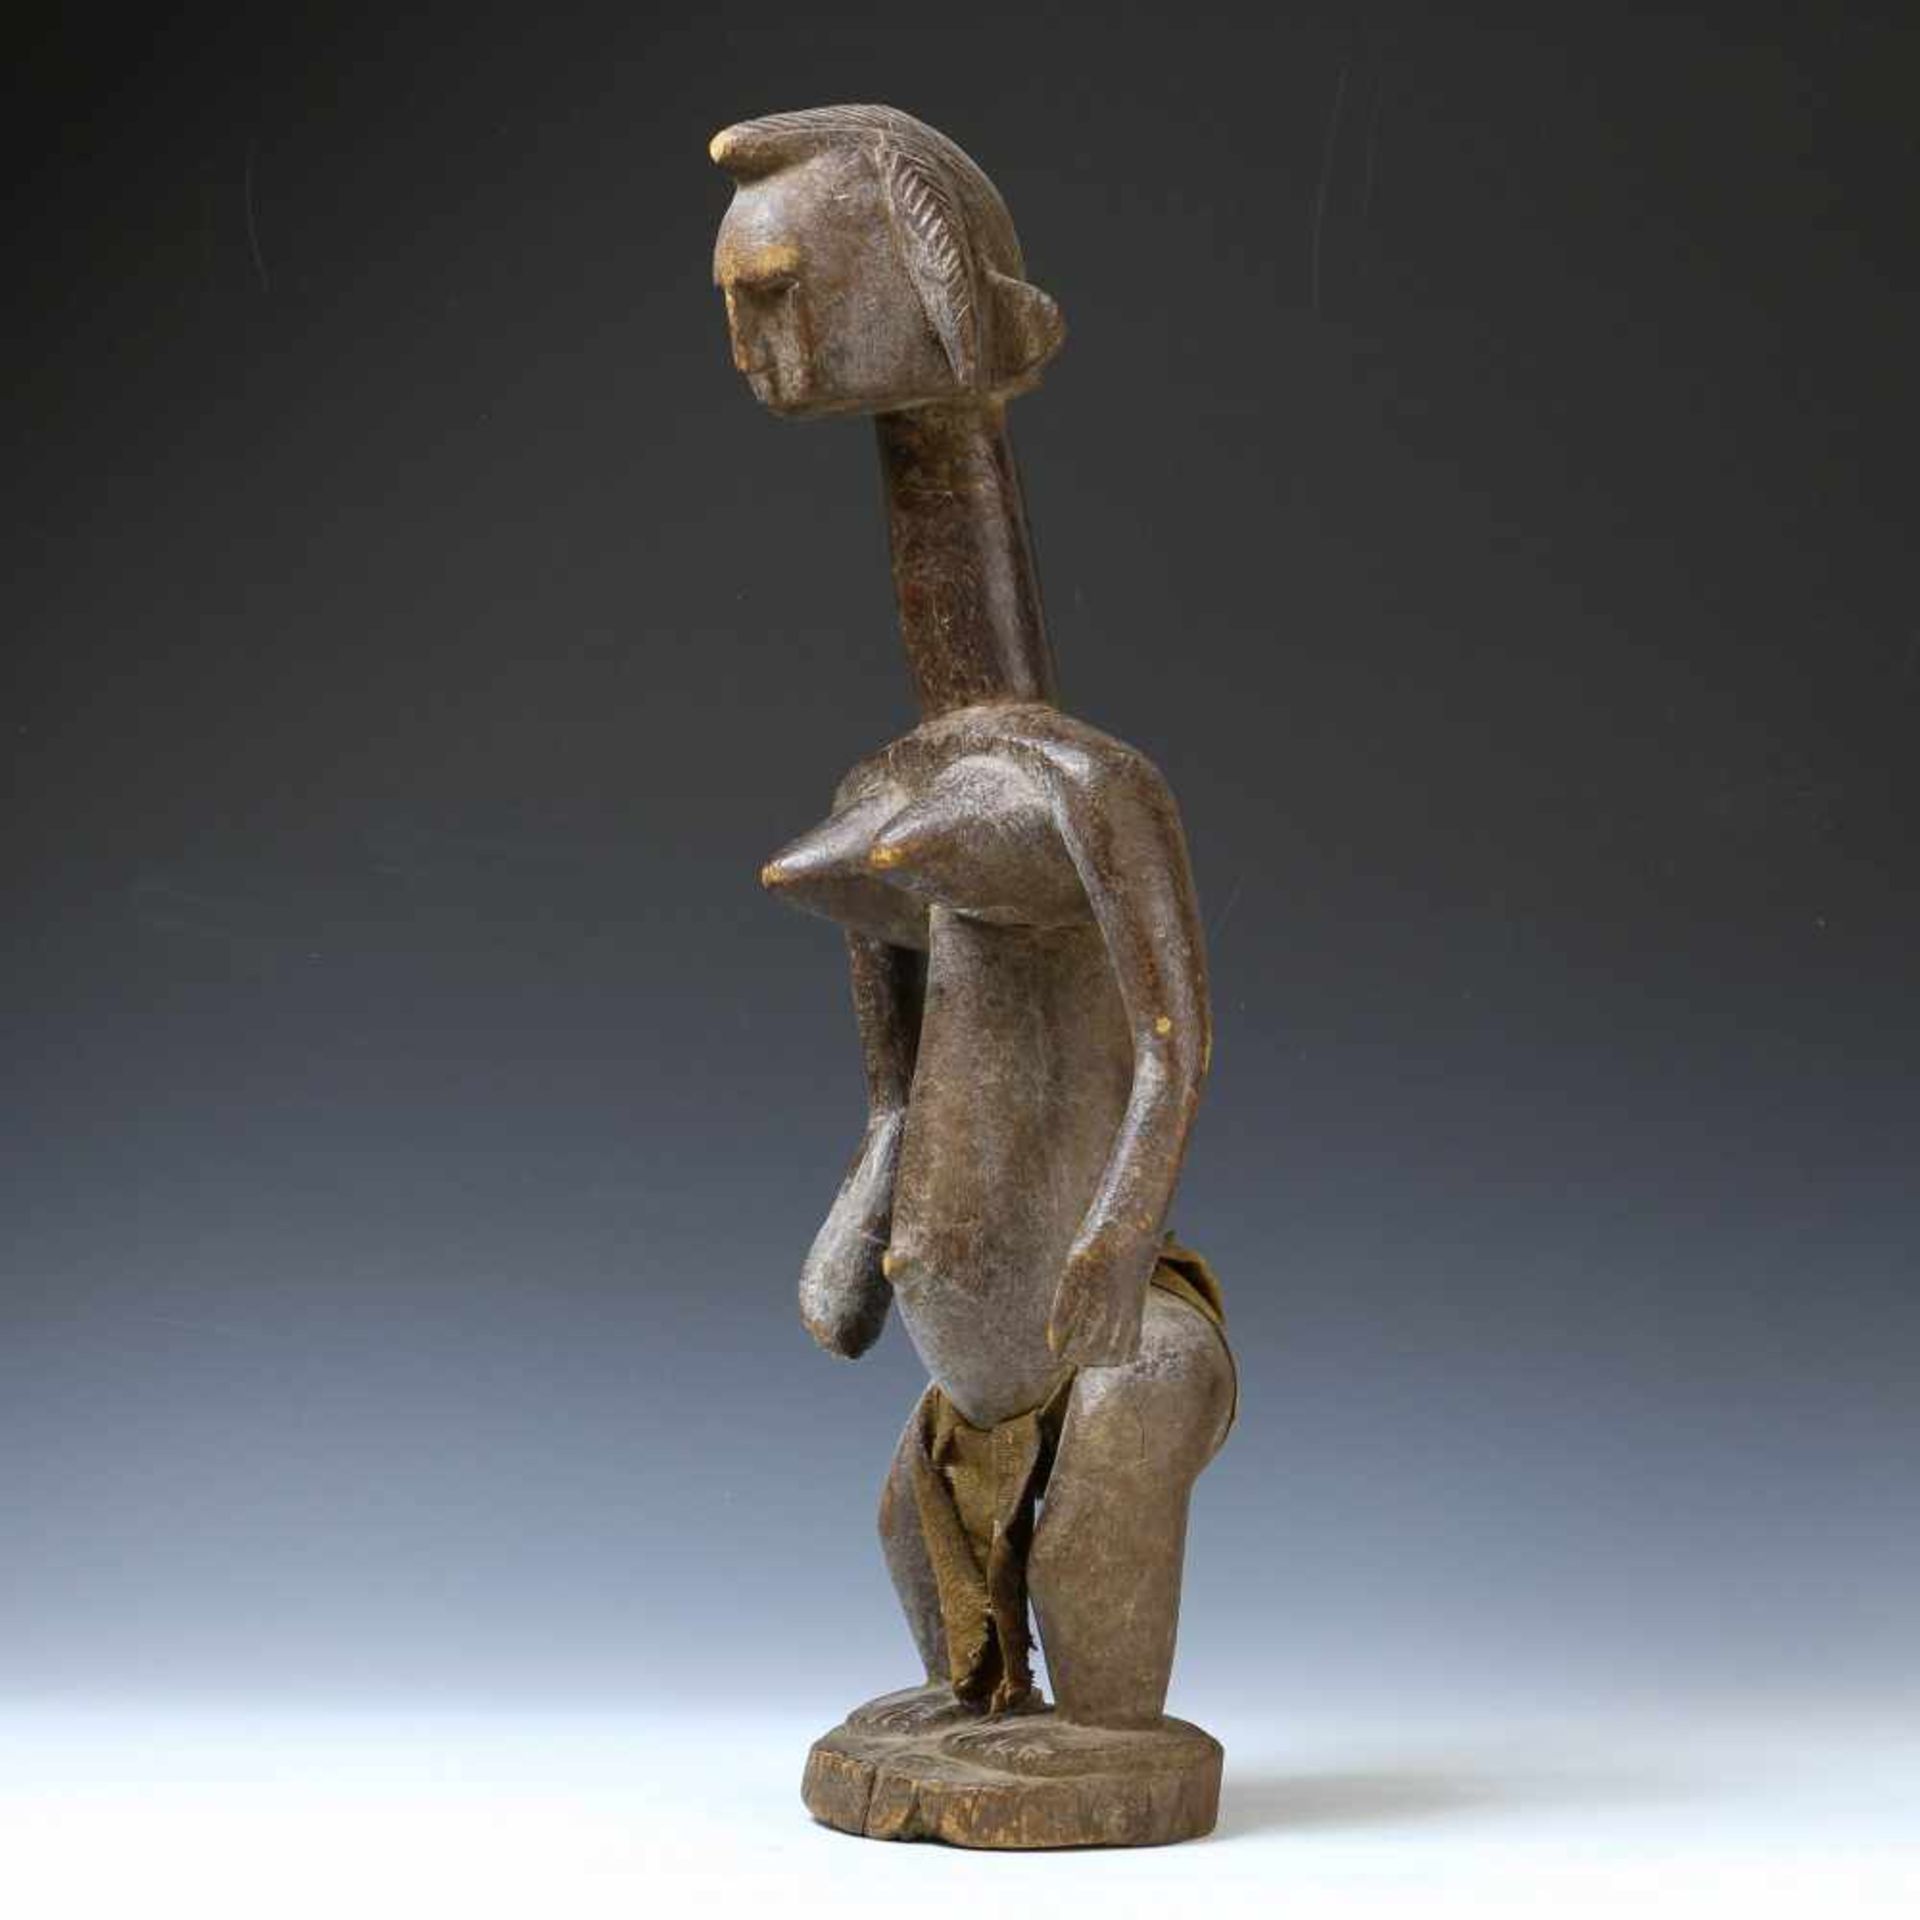 Ivory Coast, Senufo, standing female figurewith broad shoulders, elongated neck and hair in two